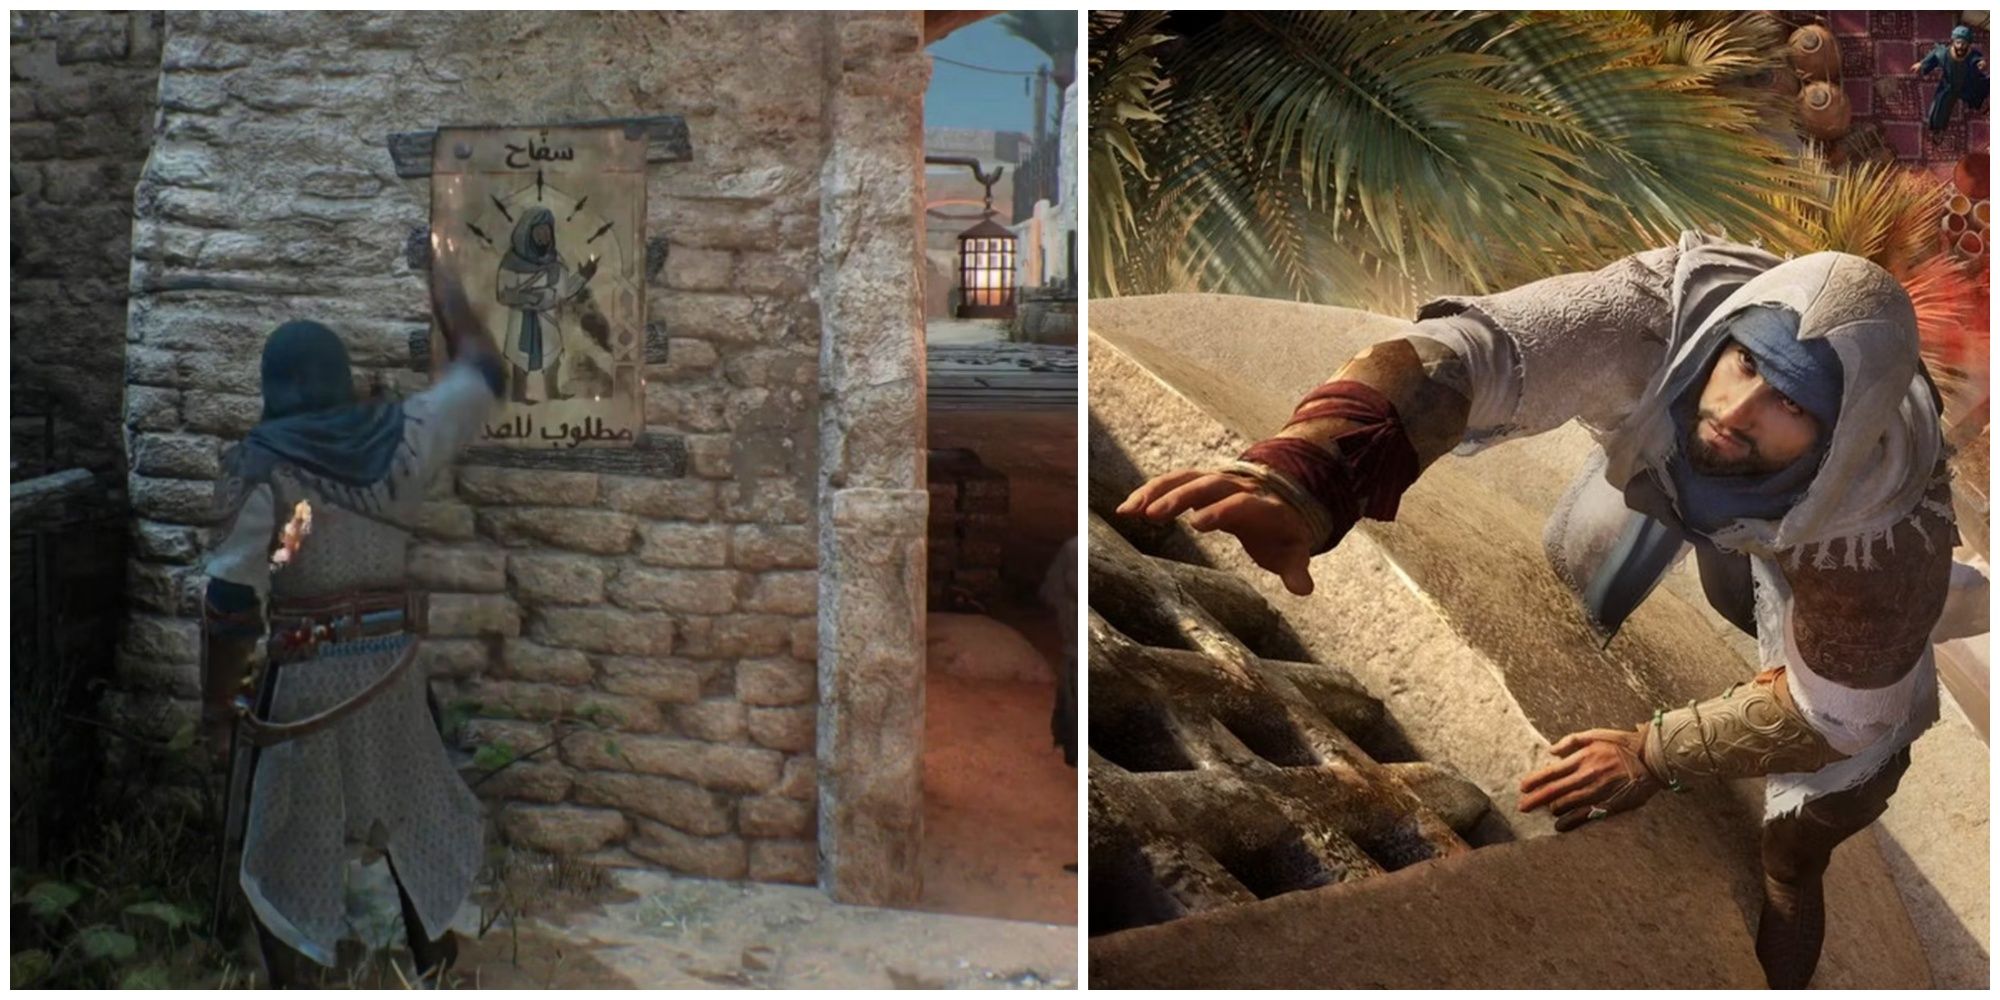 assassin's creed taking down wanted poster climbing wall